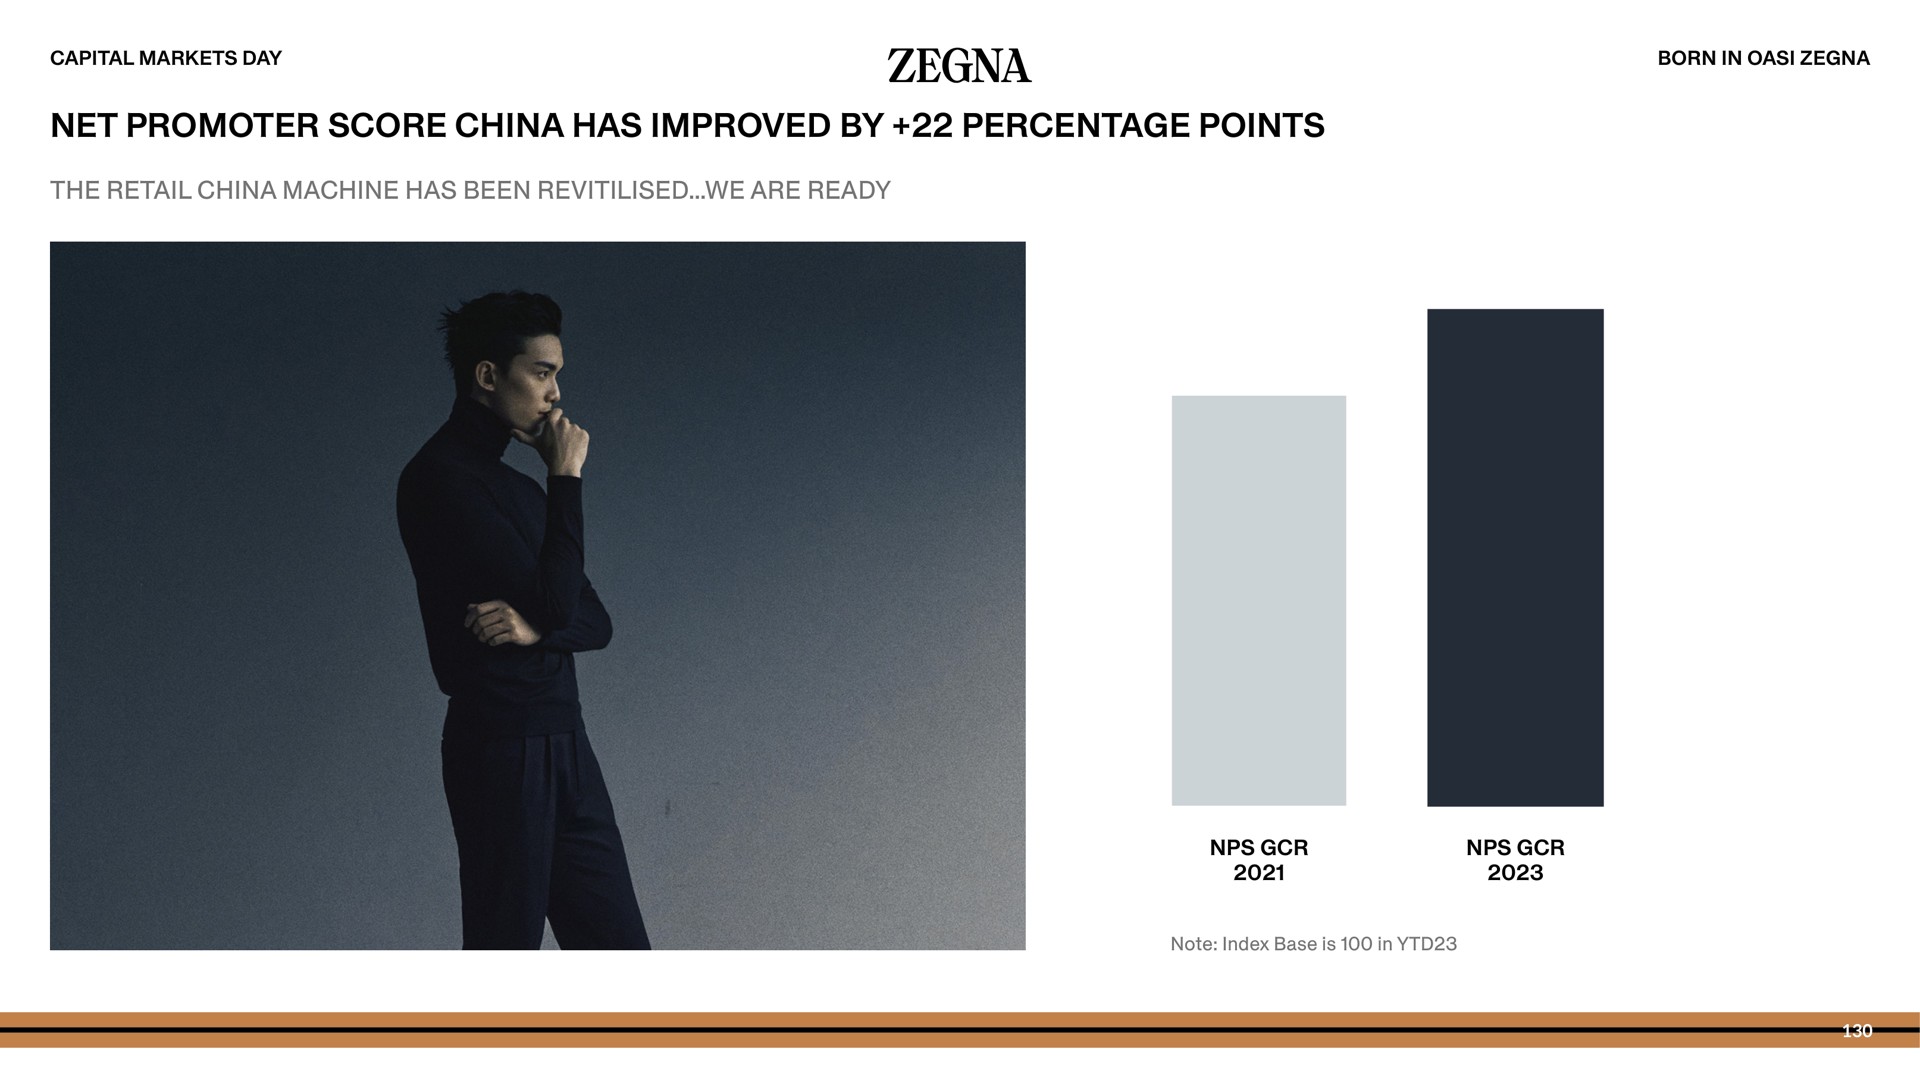 net promoter score china has improved by percentage points | Zegna